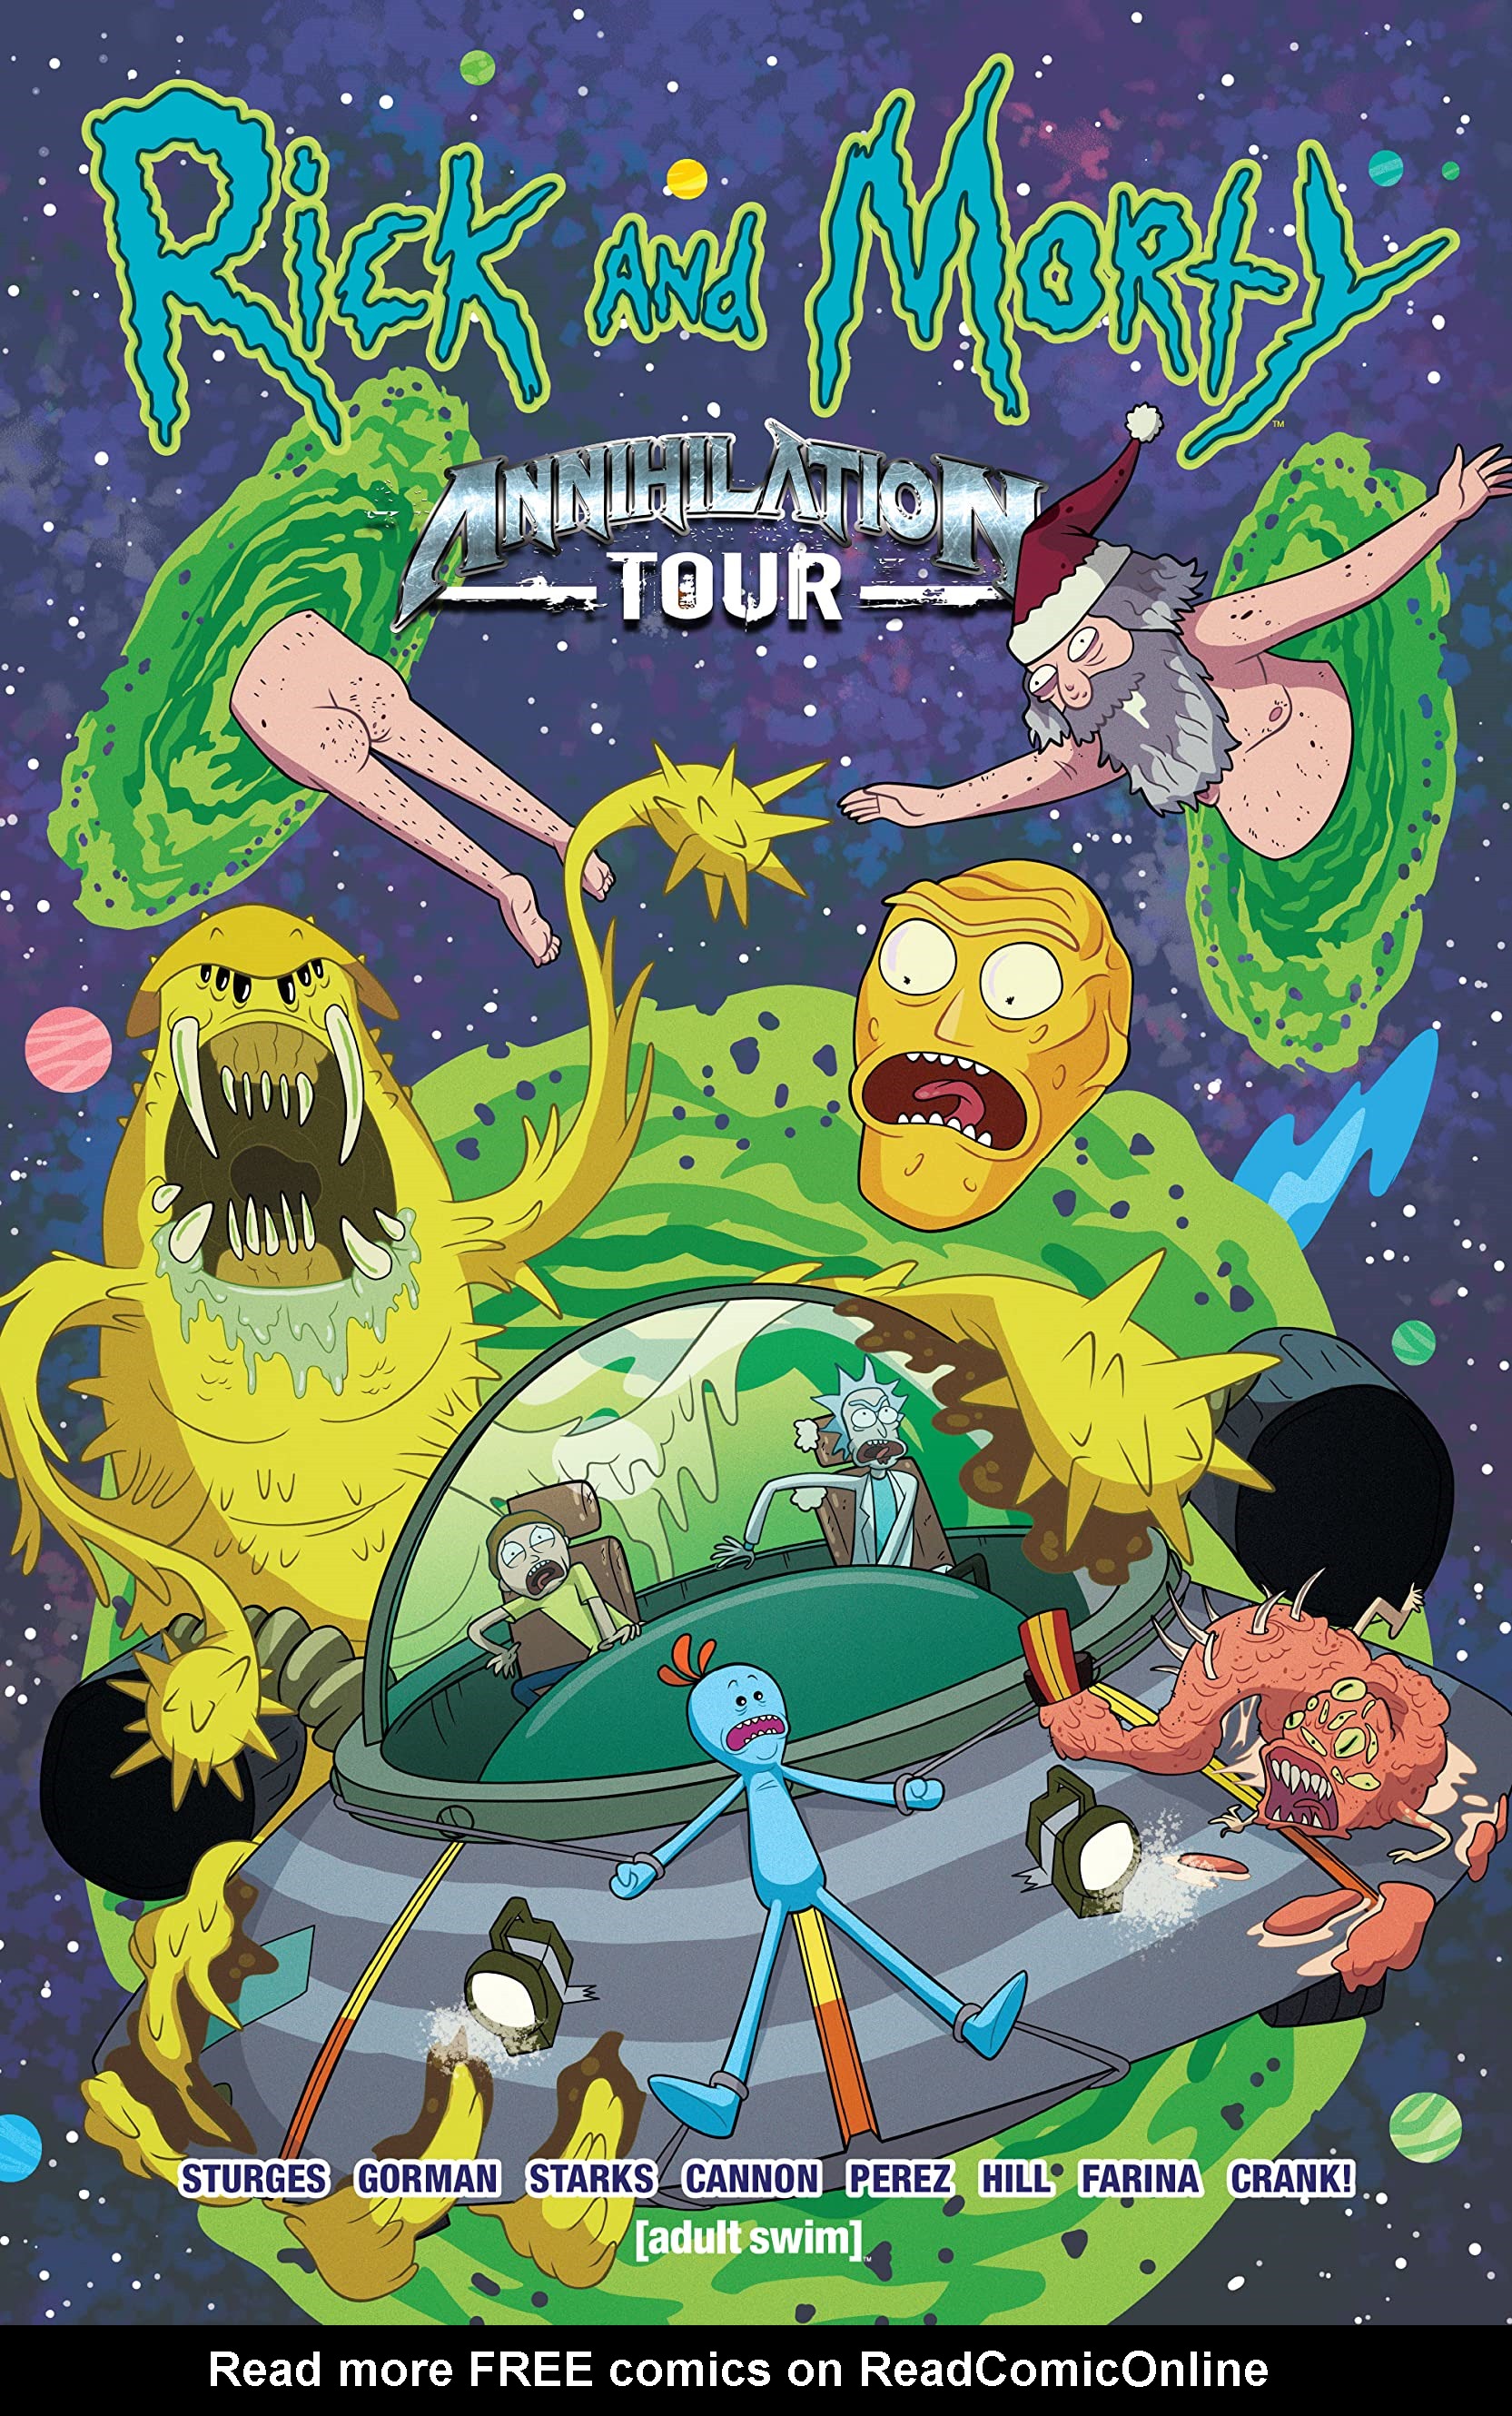 Read online Rick and Morty: Annihilation Tour comic -  Issue # TPB - 1